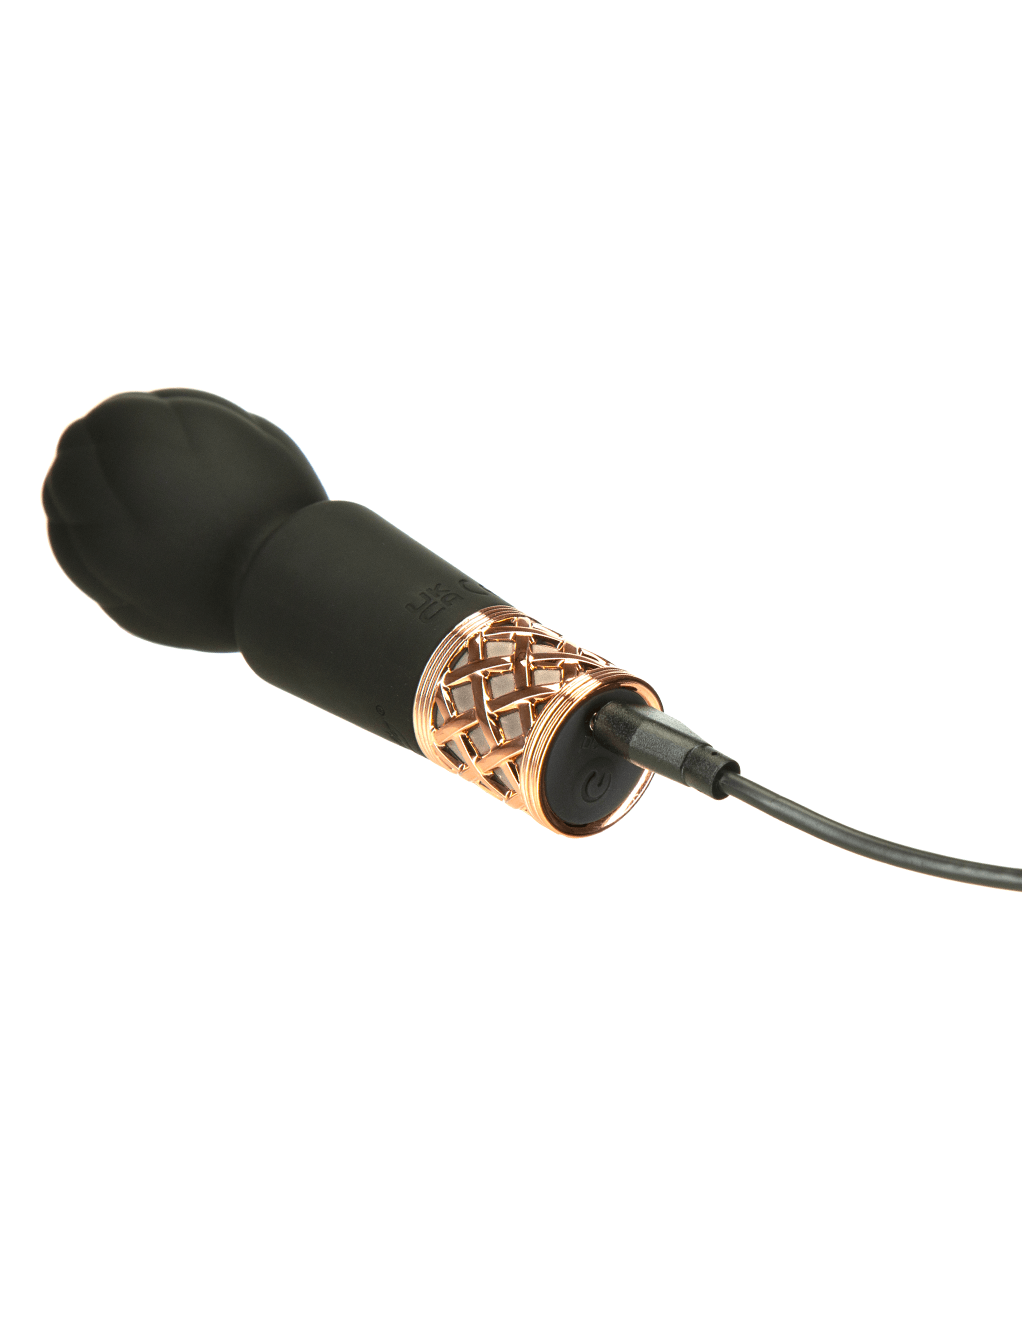 Pillow Talk Pleasure Wand - Black - With Charger